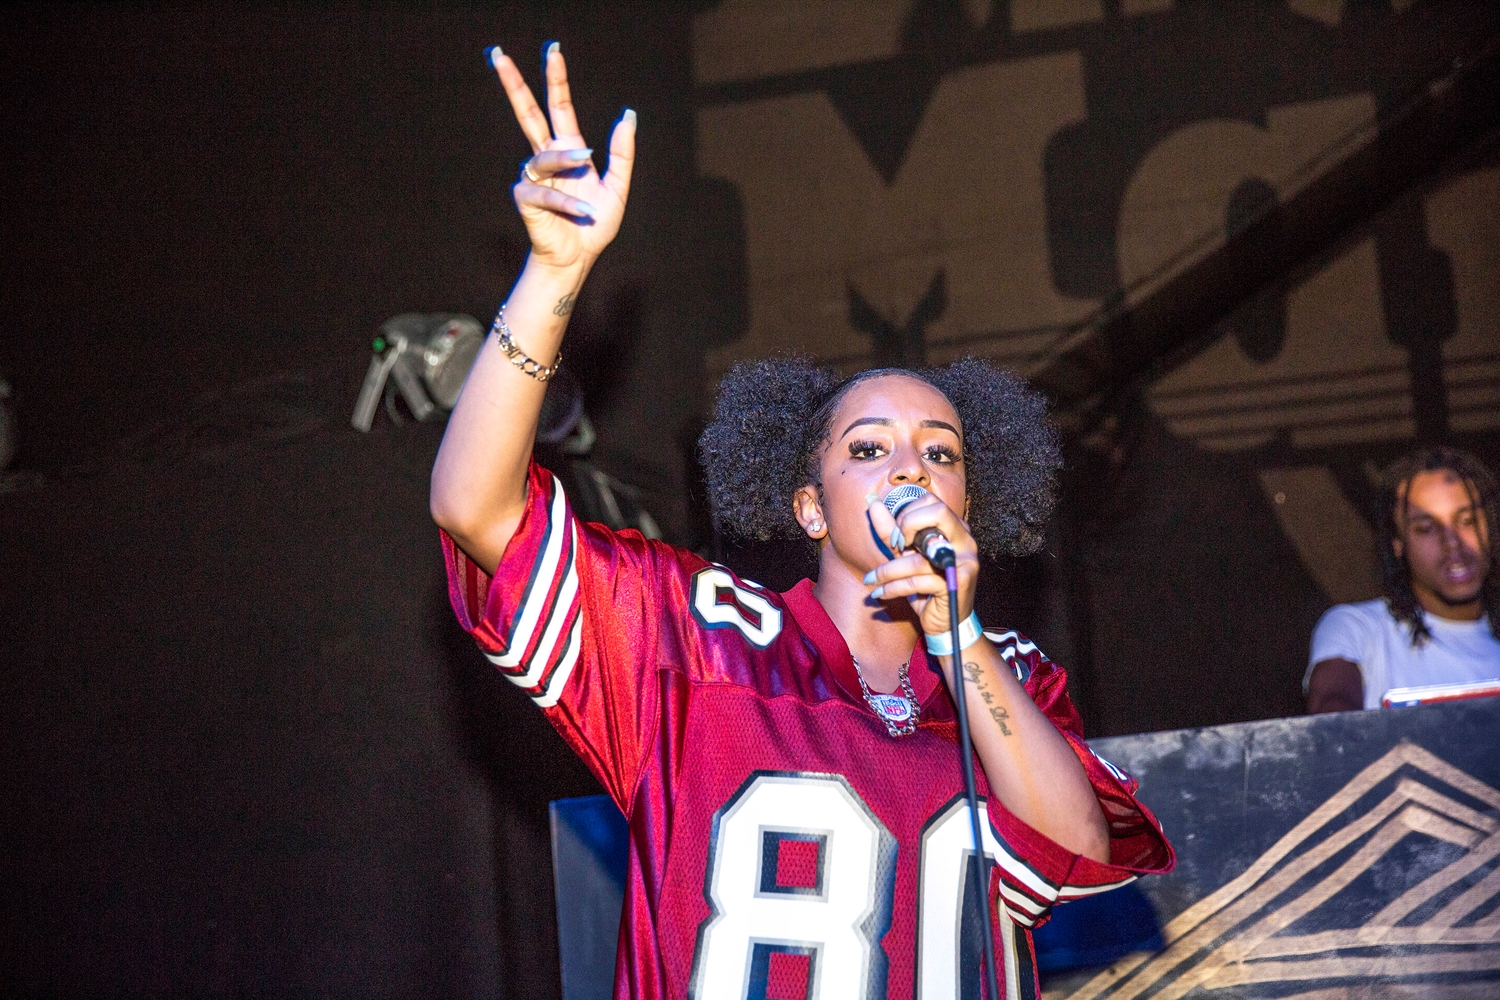 Paigey Cakey brings non-stop celebration to Birmingham Stand For Something date